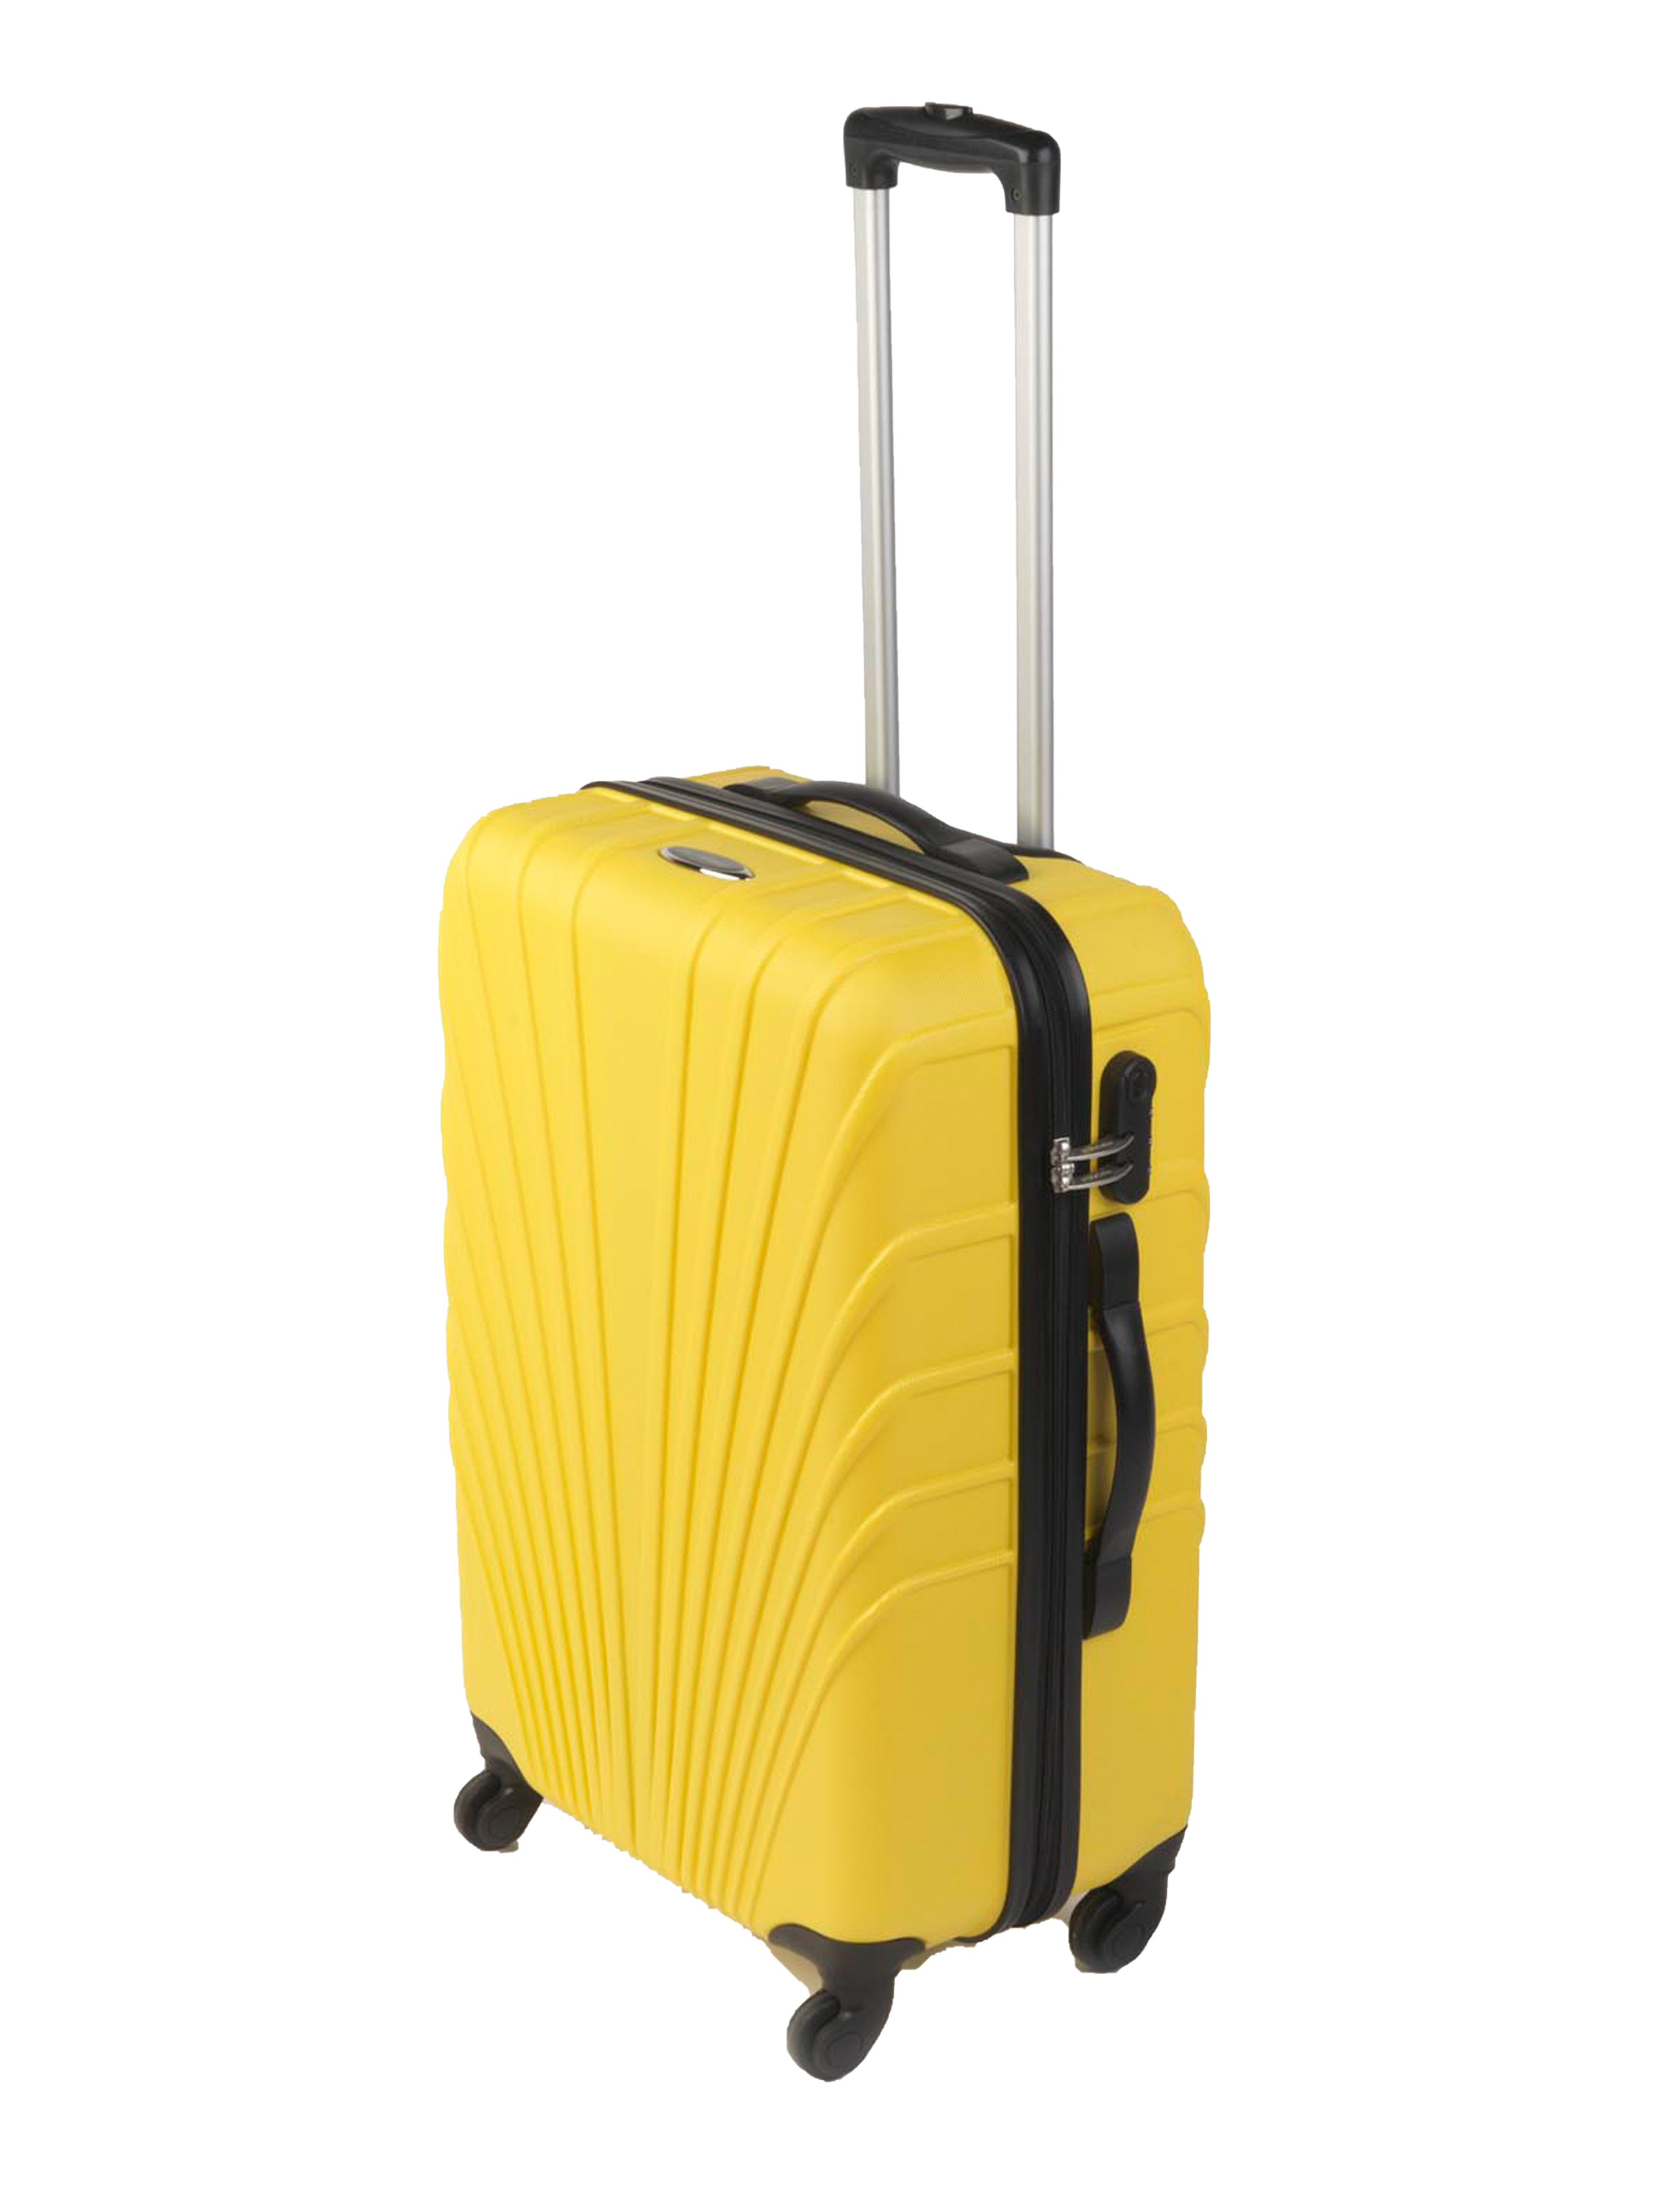 Suitcase PNG Free File Download